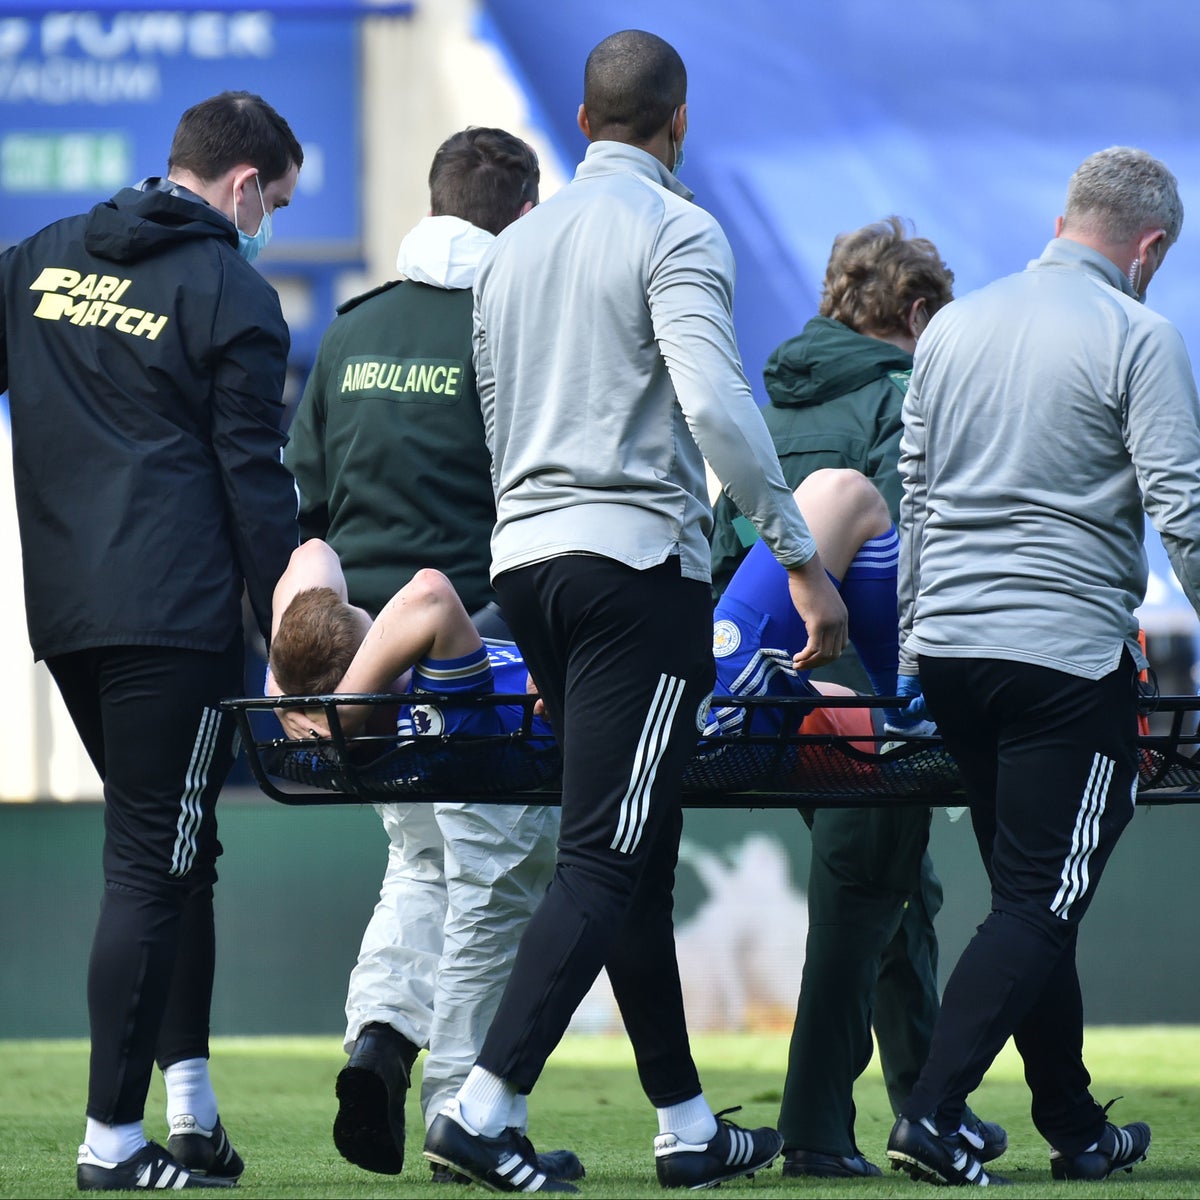 Harvey Barnes injury leaves Leicester down to 'bare bones' and their future uncertain | The Independent